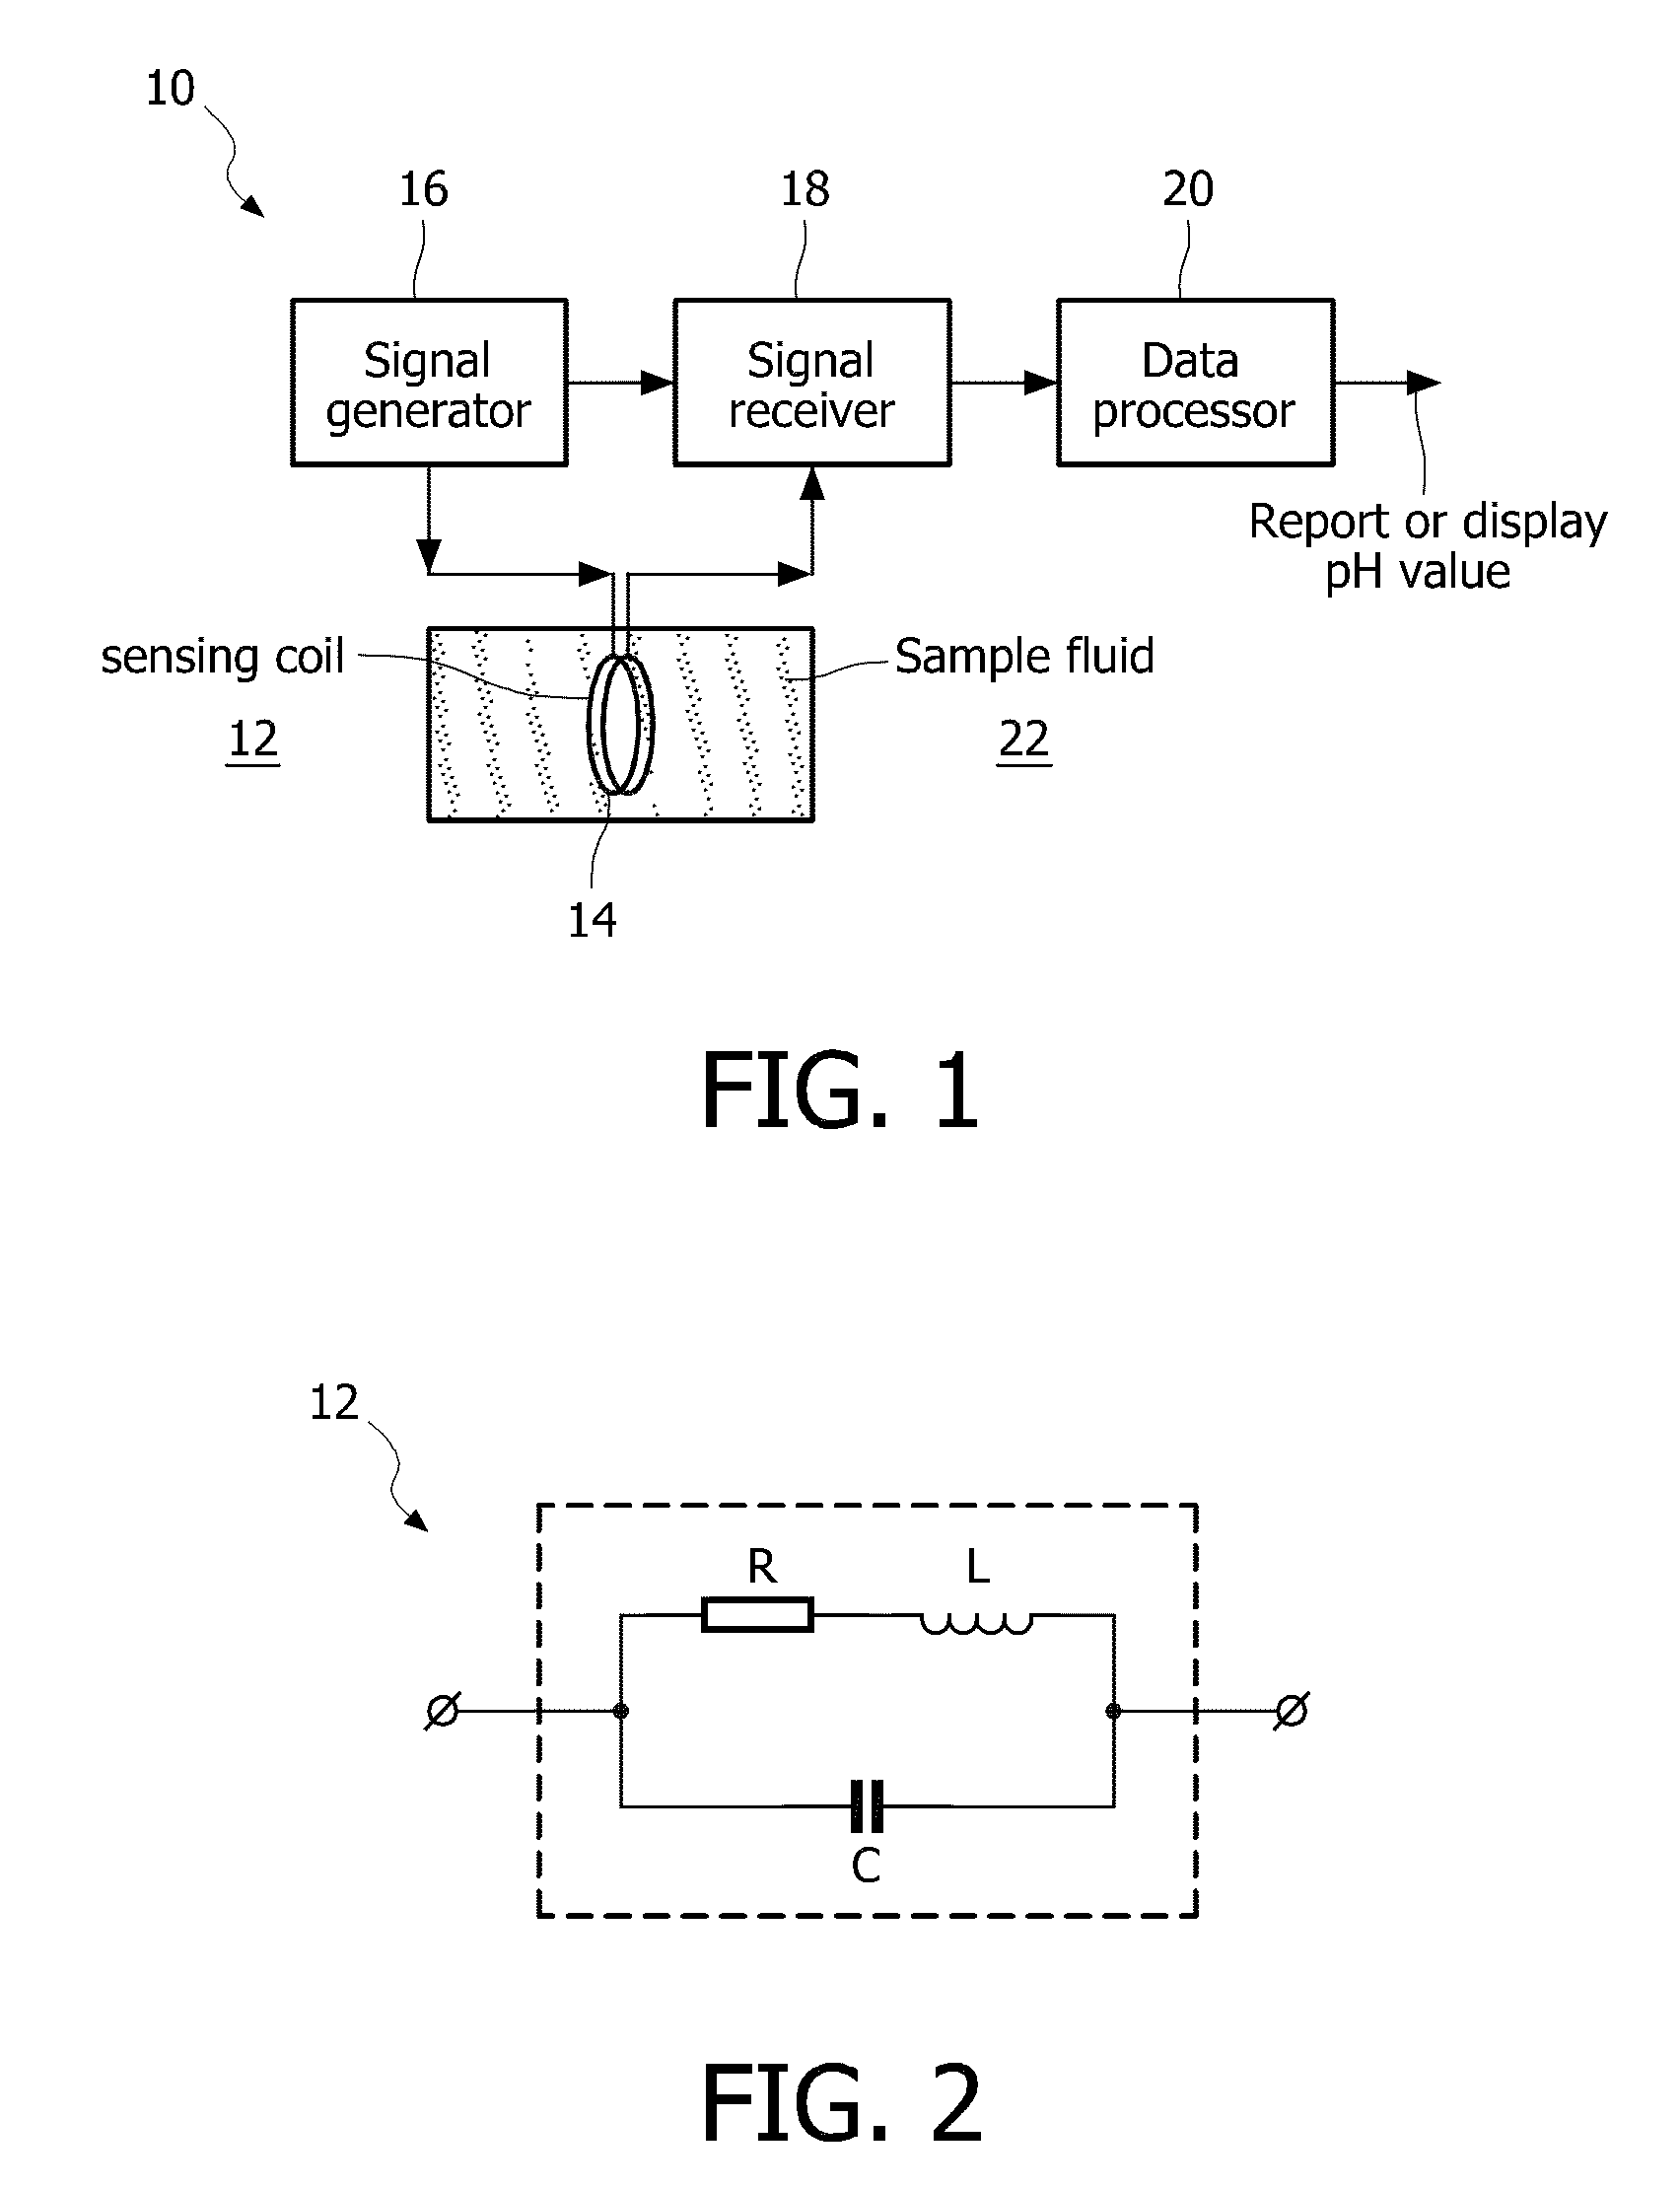 Method and apparatus for measuring fluid properties, including ph